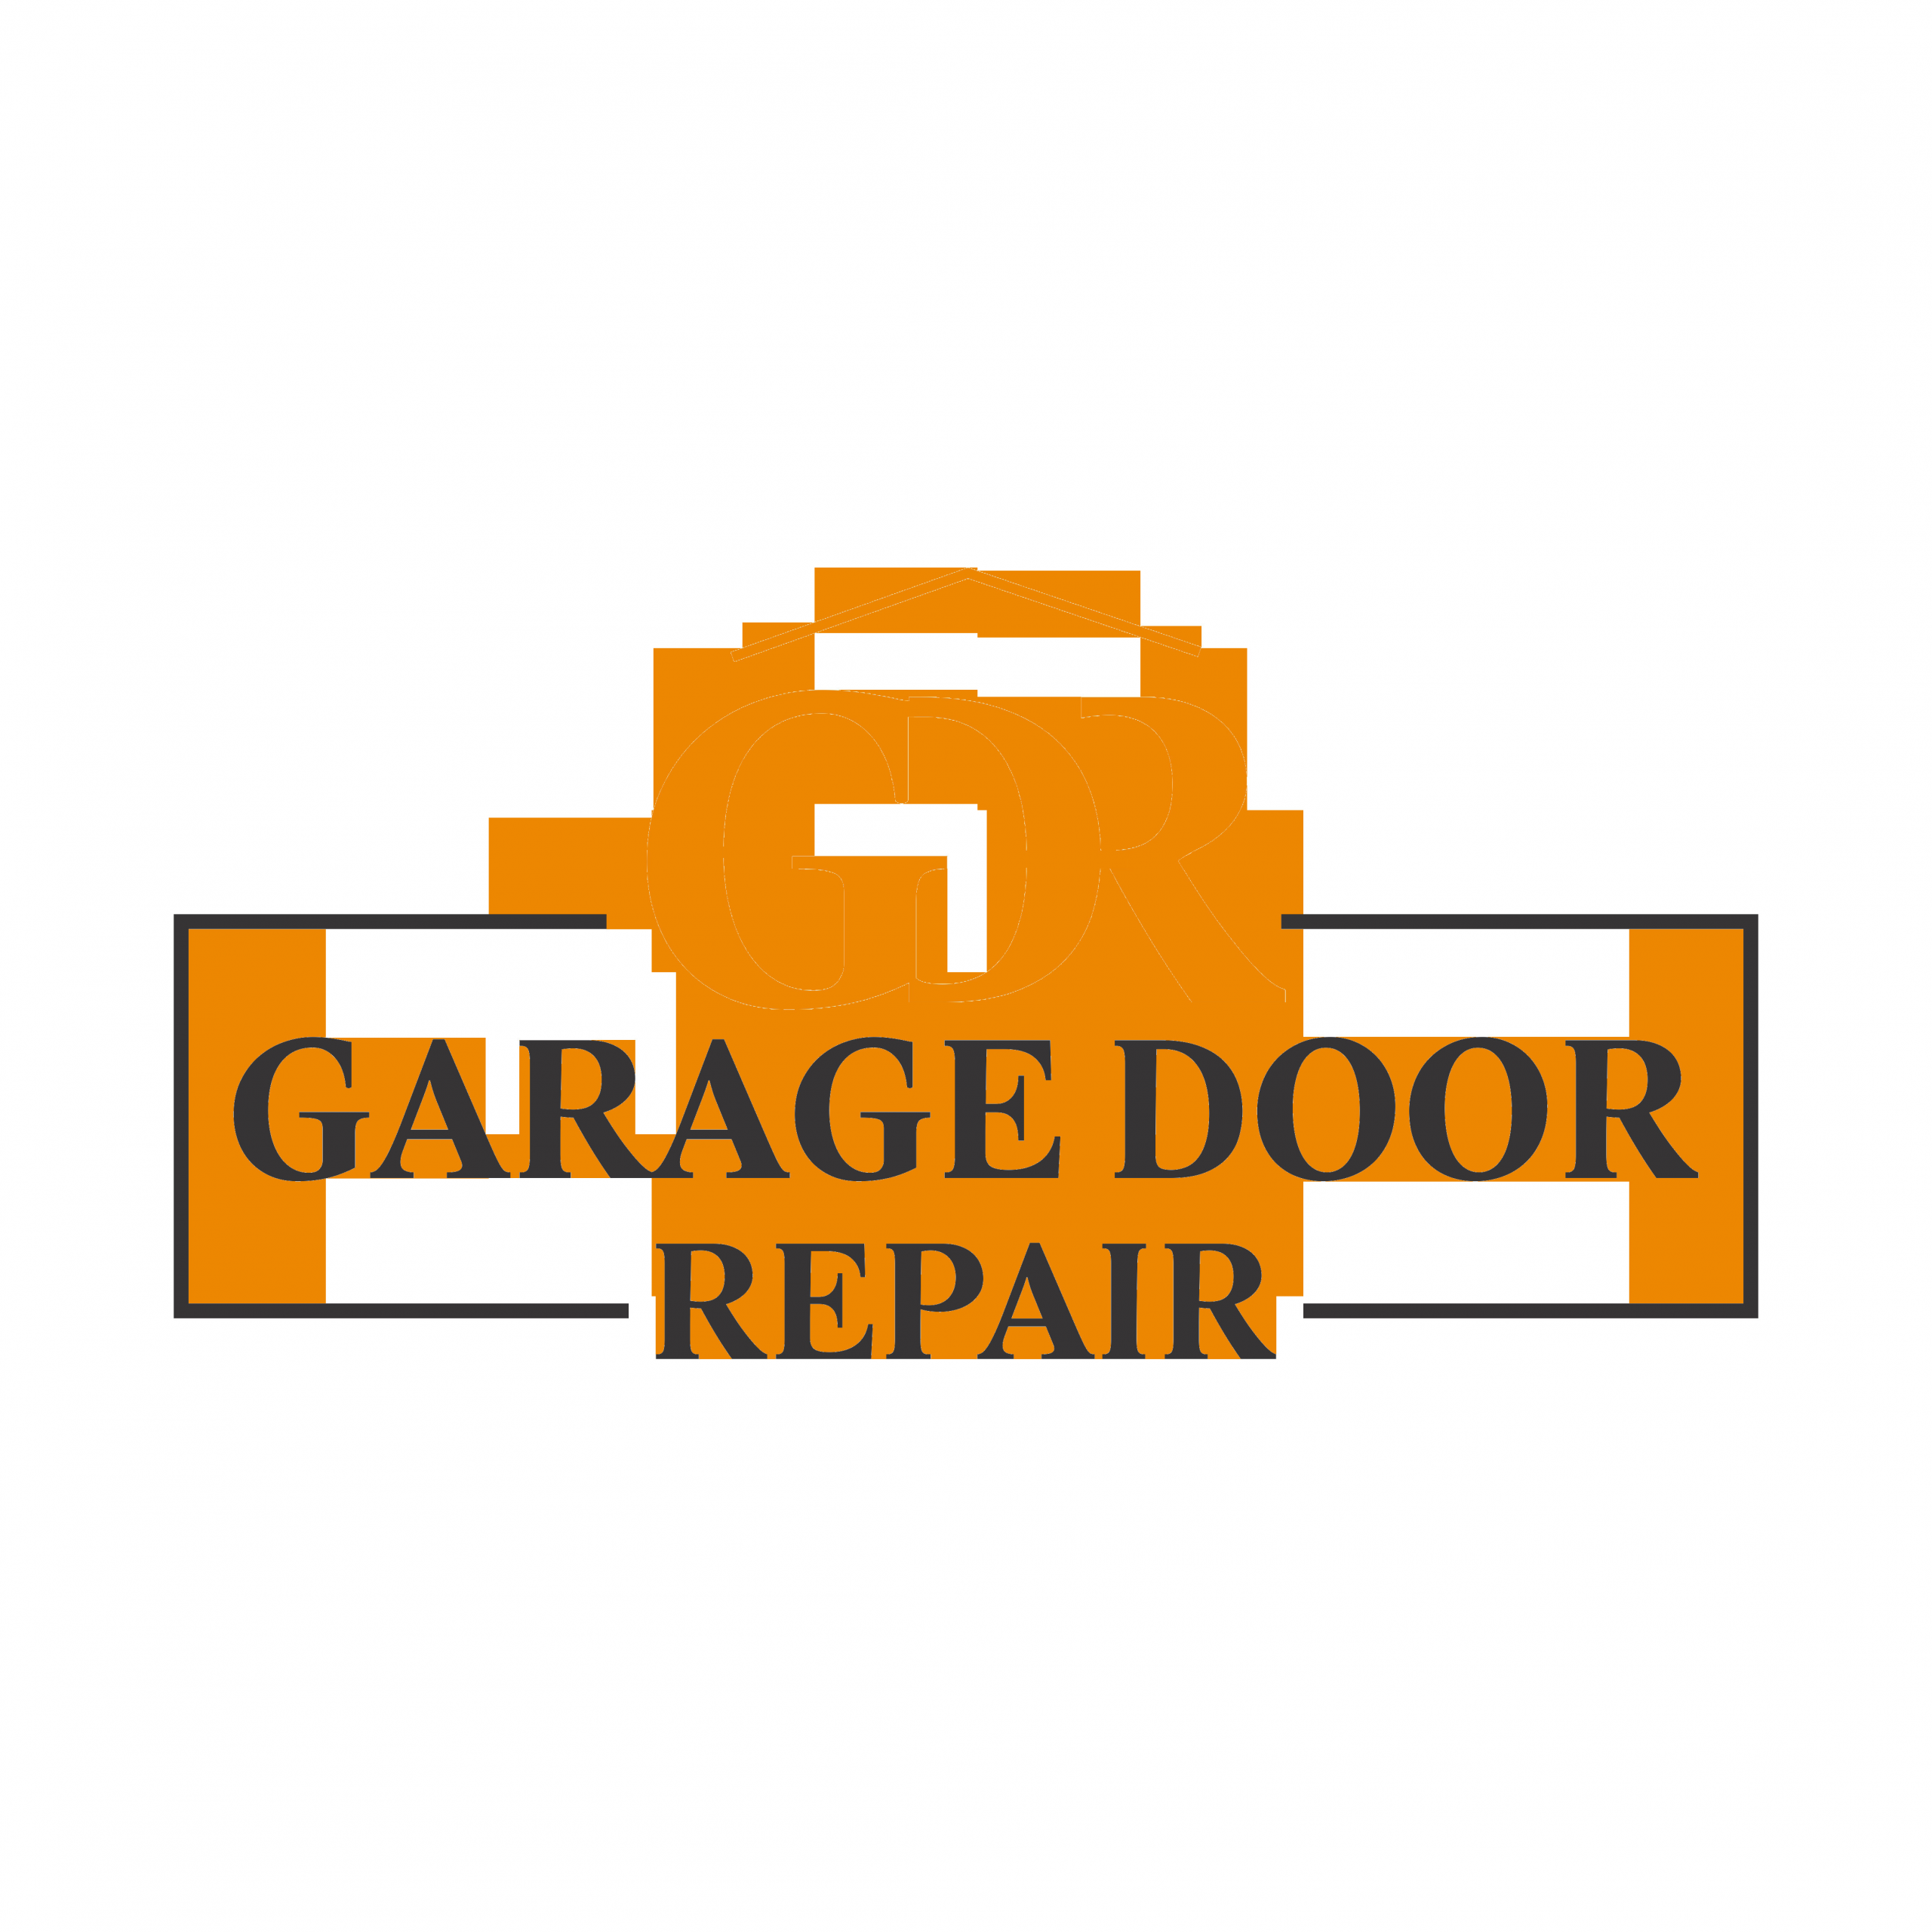 Garage Door Repair Utah
 Utah garage door repair from honest professional techs at